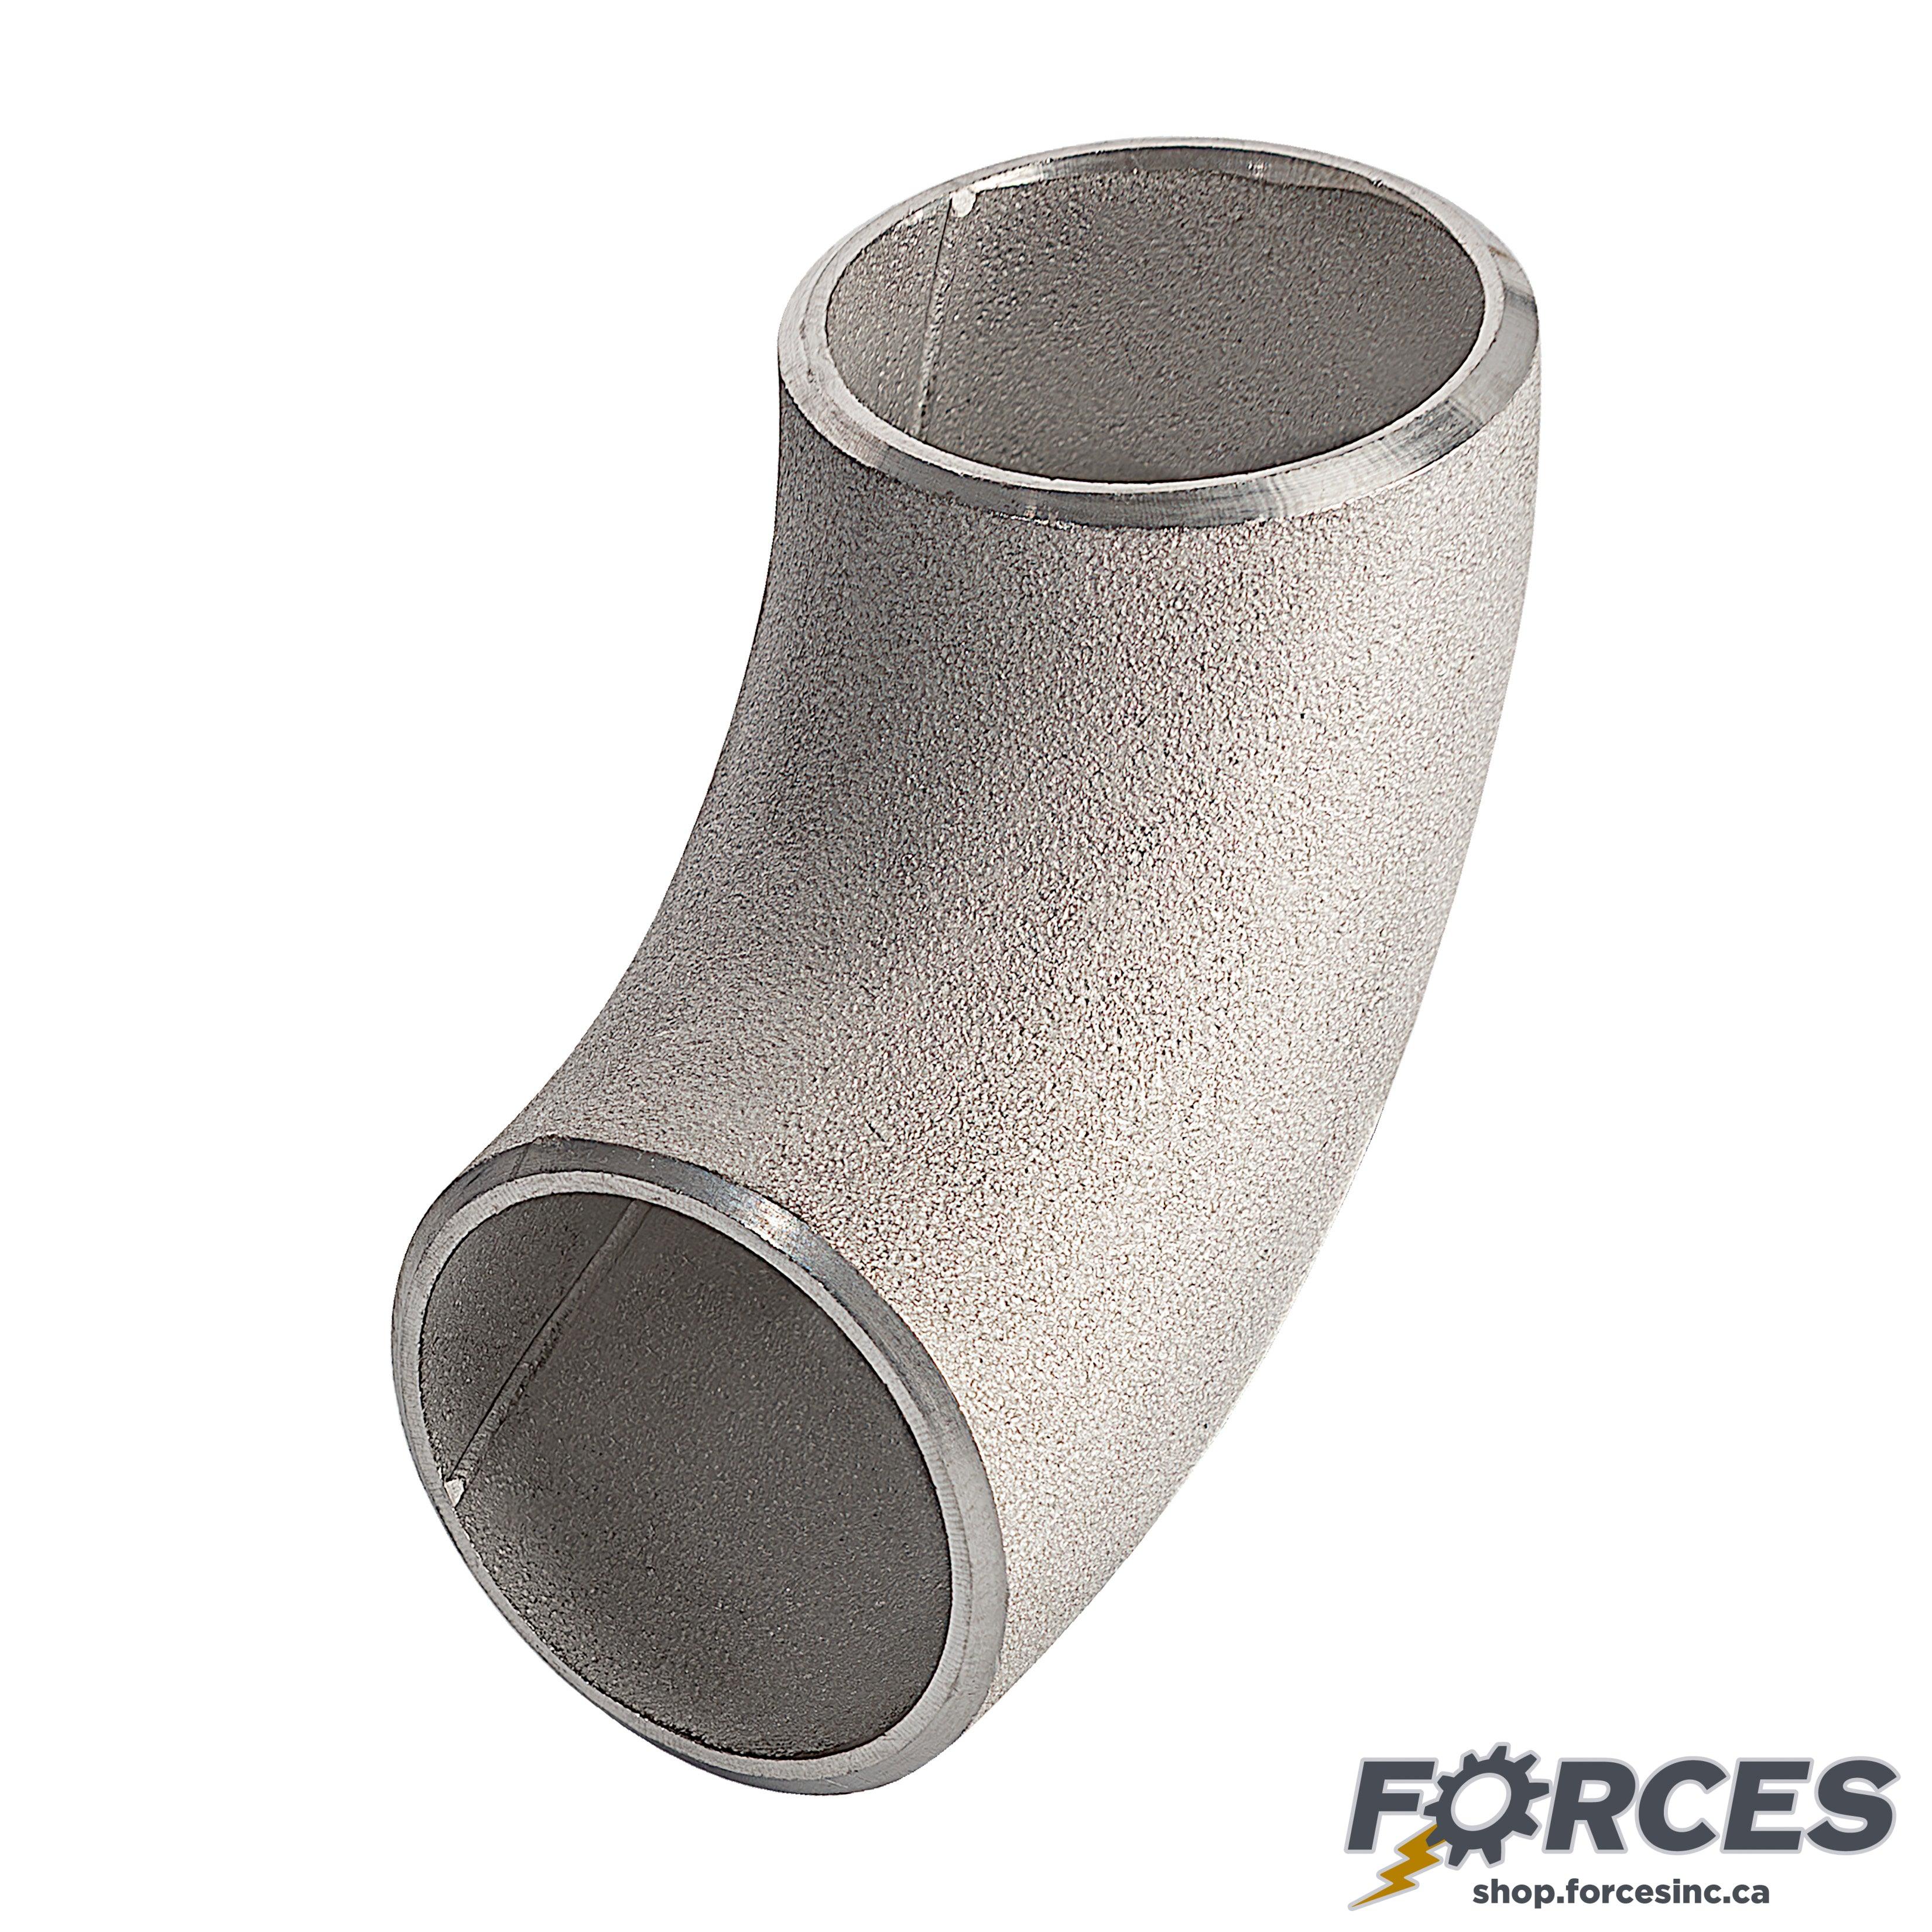 1-1/2" Elbow 90° SCH 10 Butt Weld - Stainless Steel 304 - Forces Inc